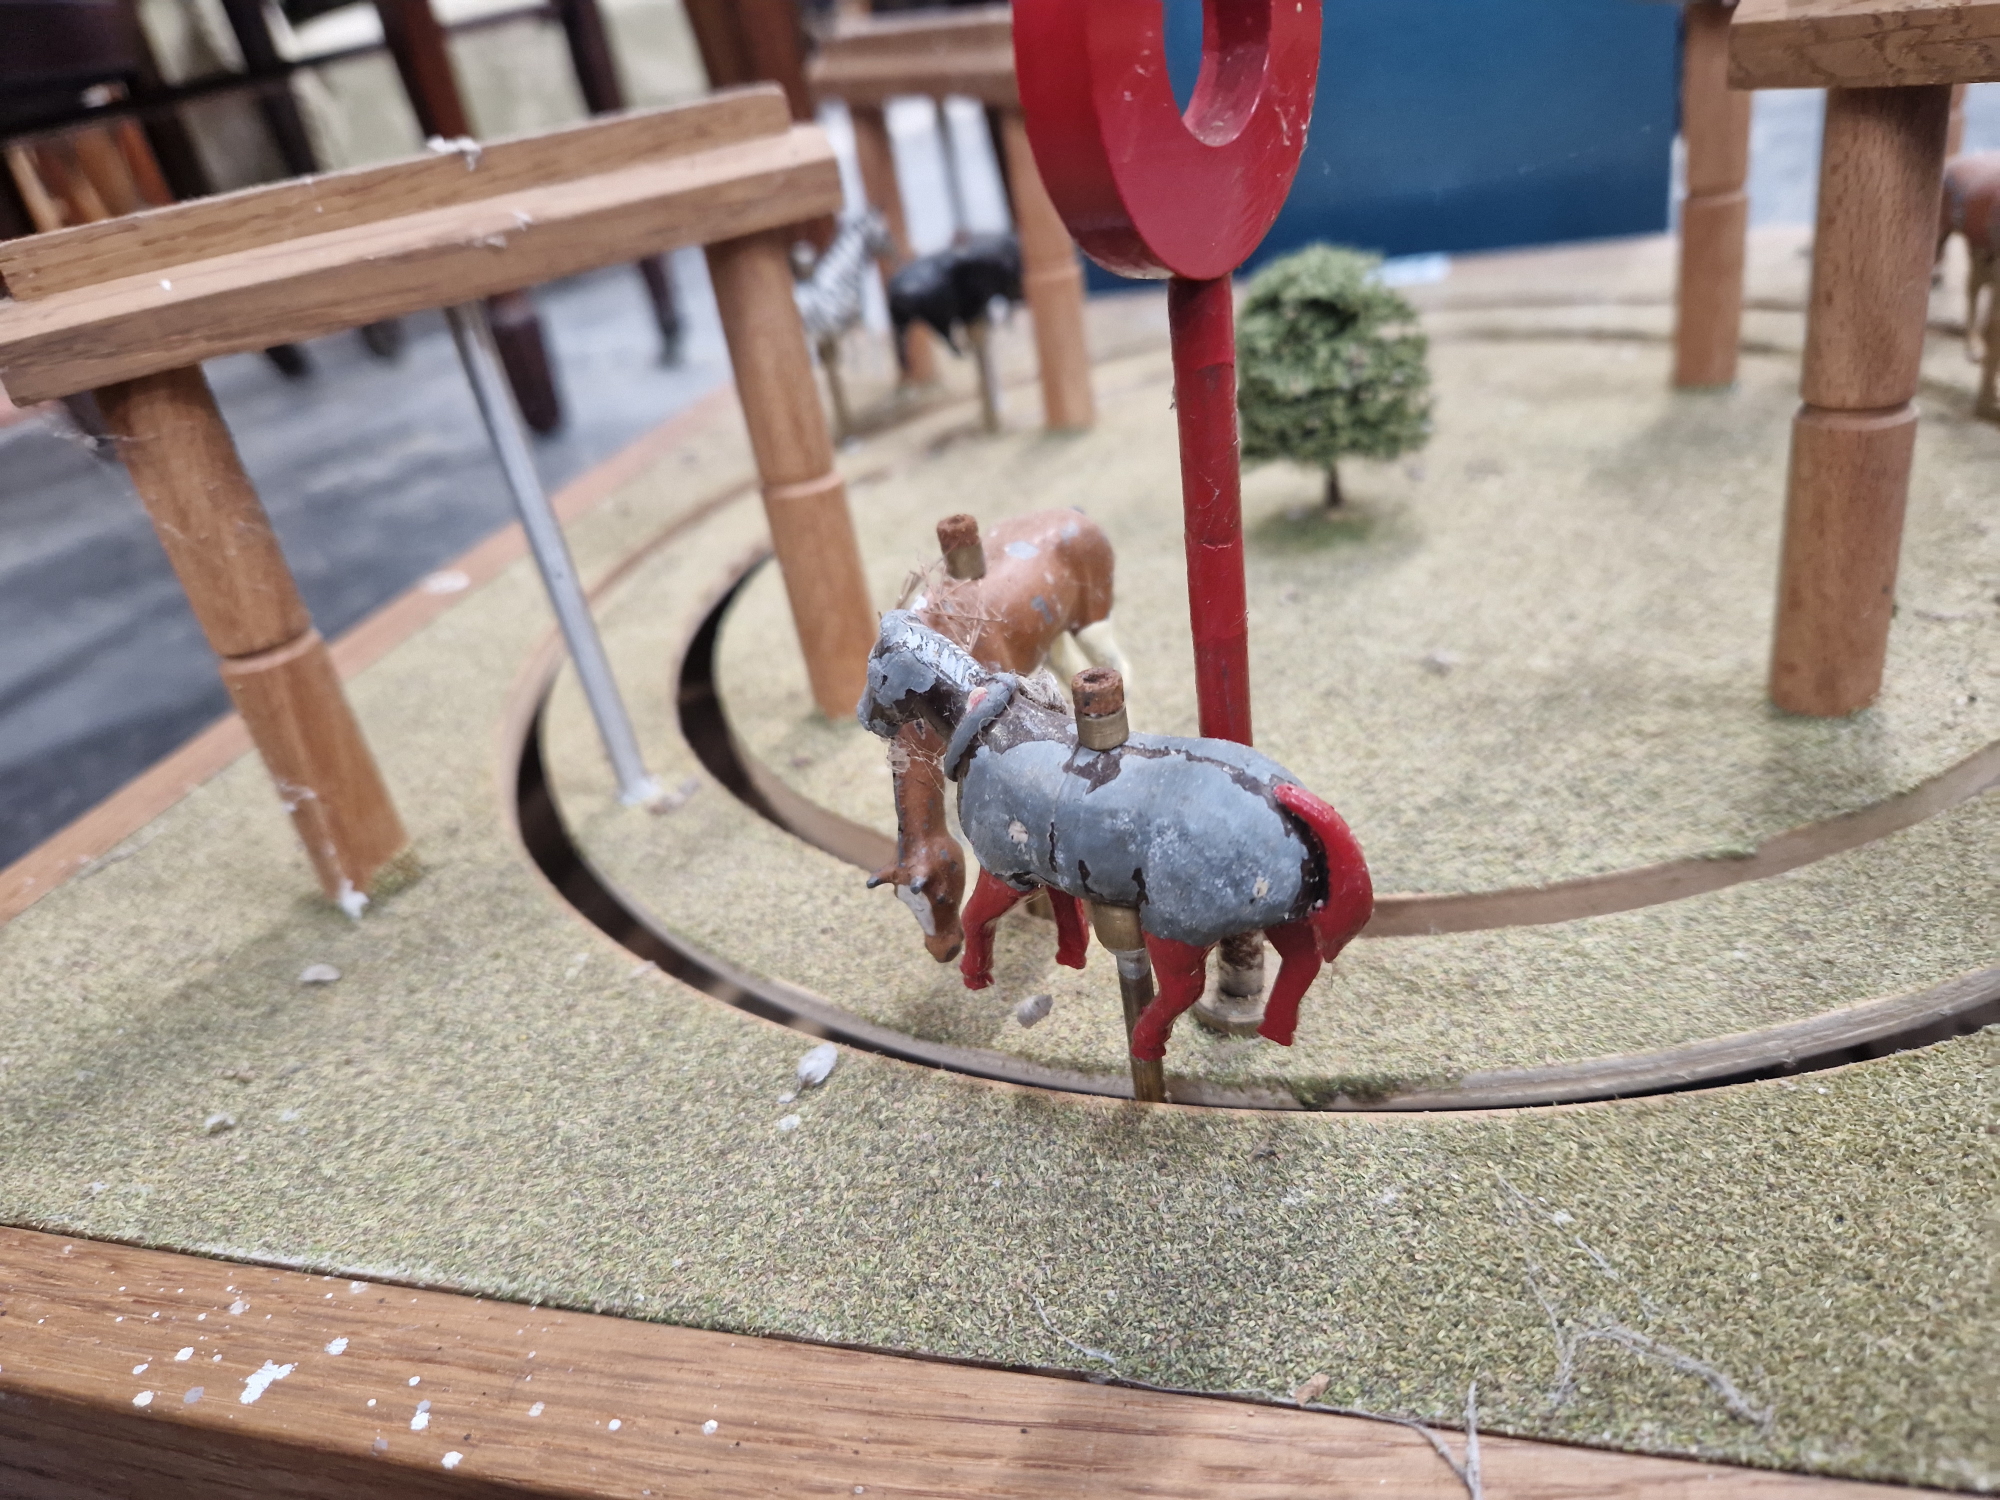 A CRANK HANDLE HORSE RACING GAME, THE FIVE HORSES RACING THROUGH WOODEN ARCHES ON A CIRCULAR TRACK - Image 3 of 4